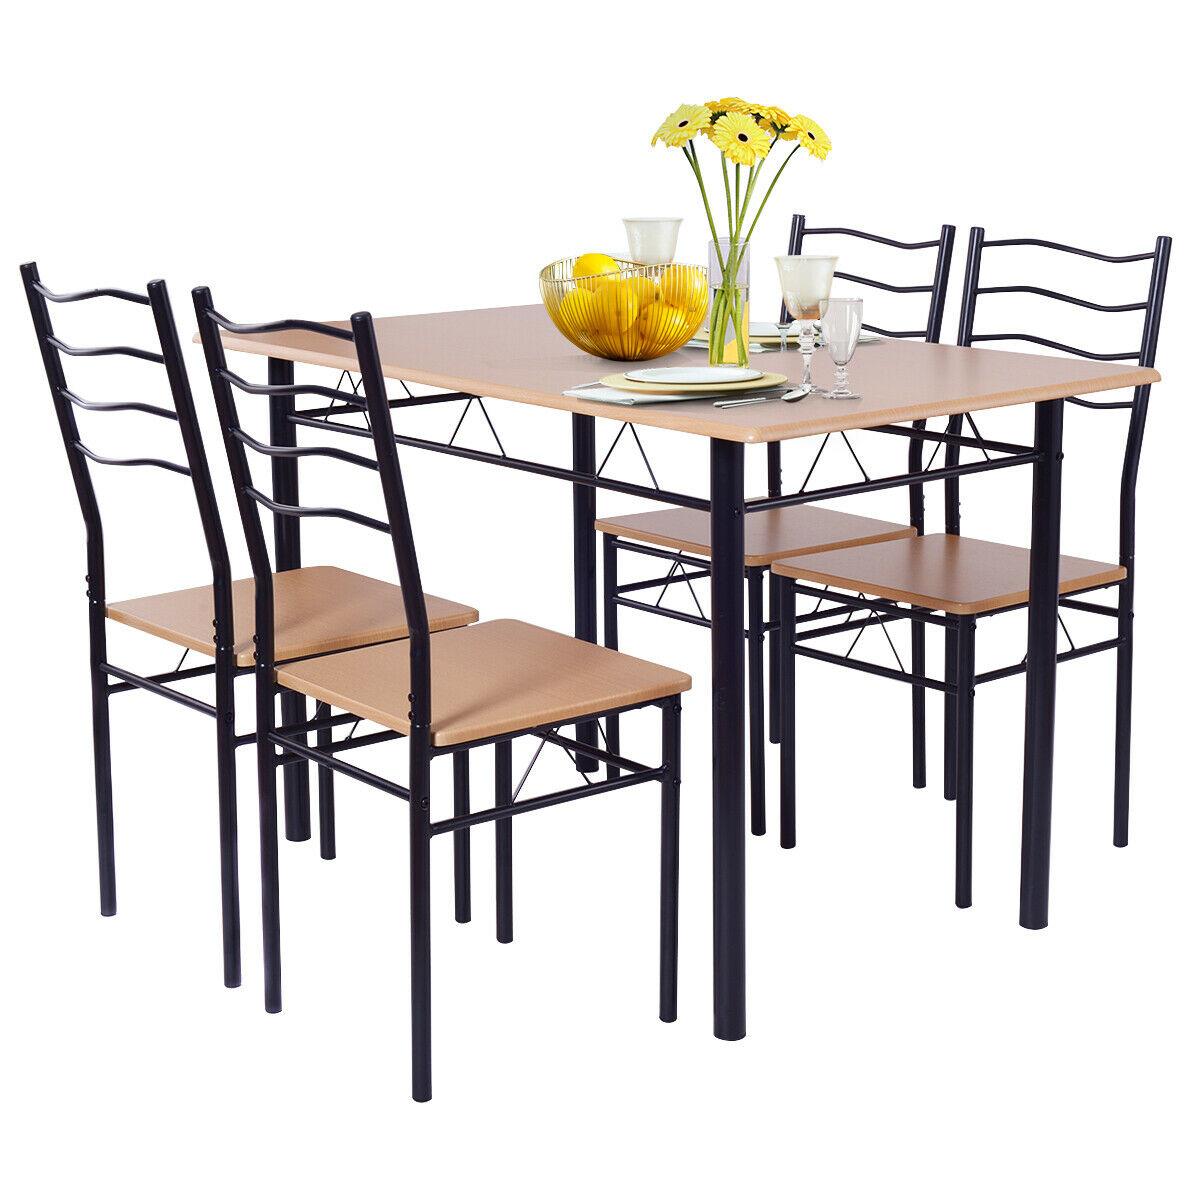 5 Piece Dining Table Set with 4 Chairs Wood Metal Kitchen Breakfast Furniture (FW1)(1U67)